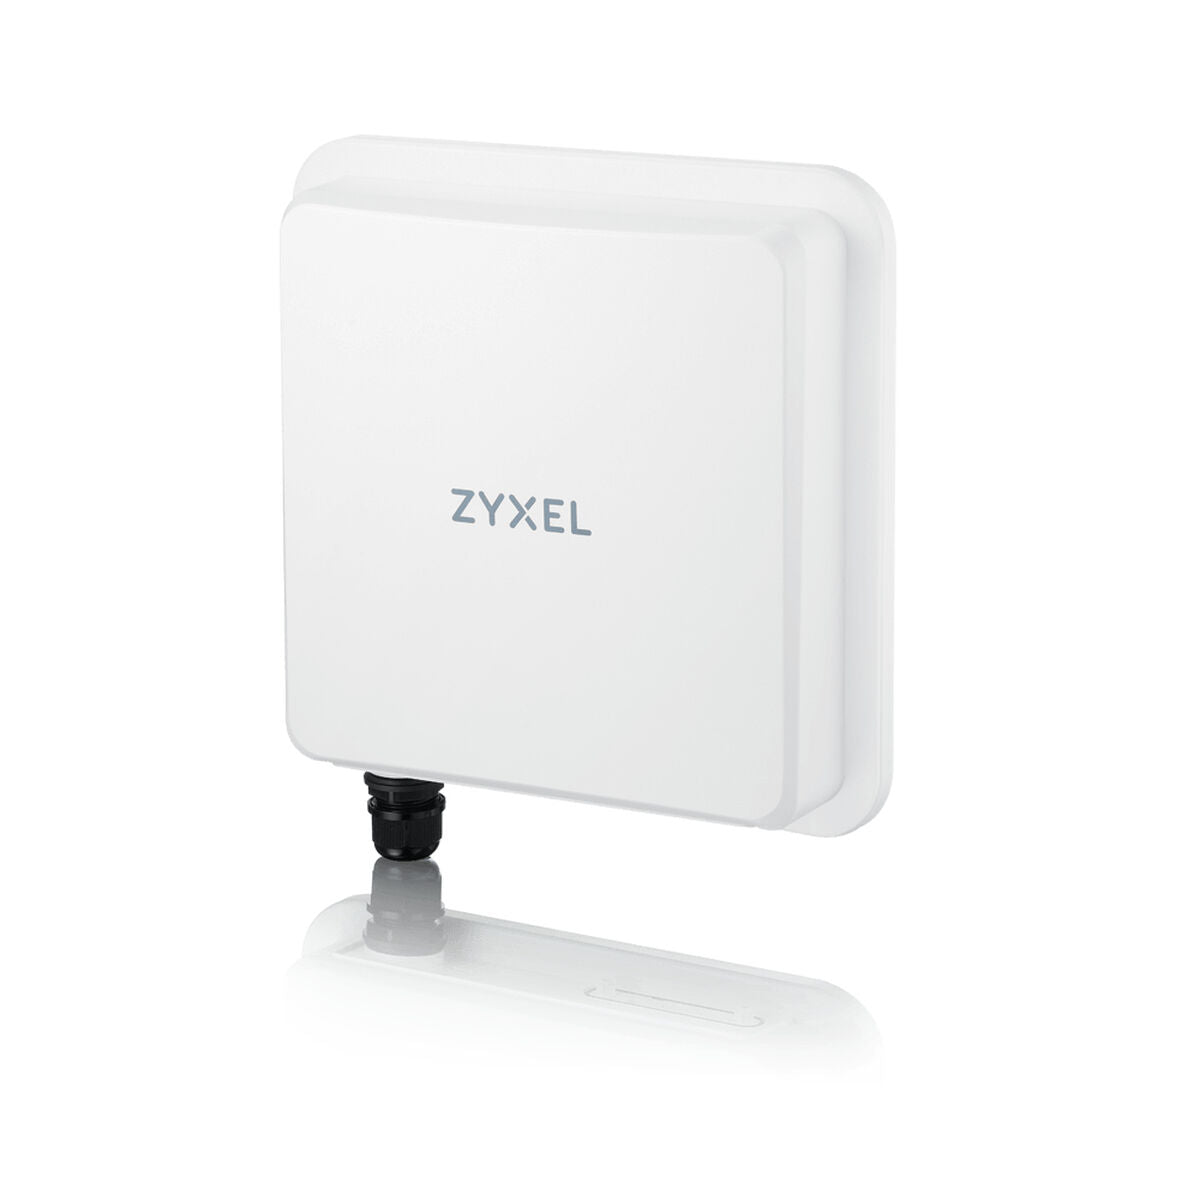 Router ZyXEL R707-M2, ZyXEL, Computing, Network devices, router-zyxel-r707-m2, Brand_ZyXEL, category-reference-2609, category-reference-2803, category-reference-2826, category-reference-t-19685, category-reference-t-19914, Condition_NEW, networks/wiring, Price_600 - 700, Teleworking, RiotNook